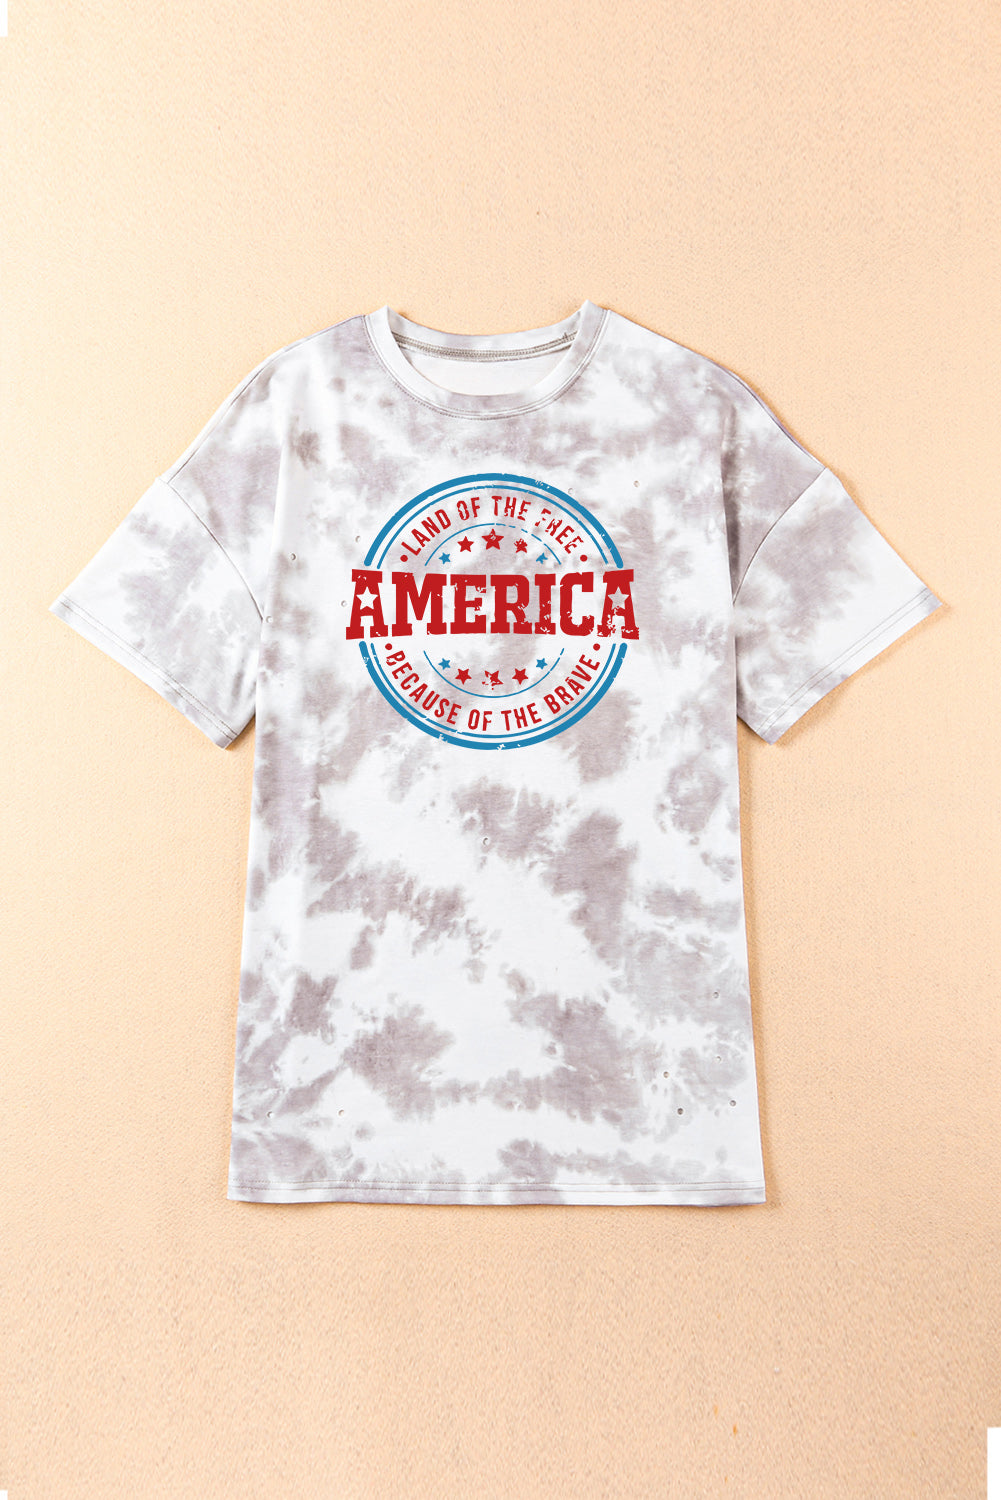 Oversized Tie-dye AMERICA T-shirt with Distressing